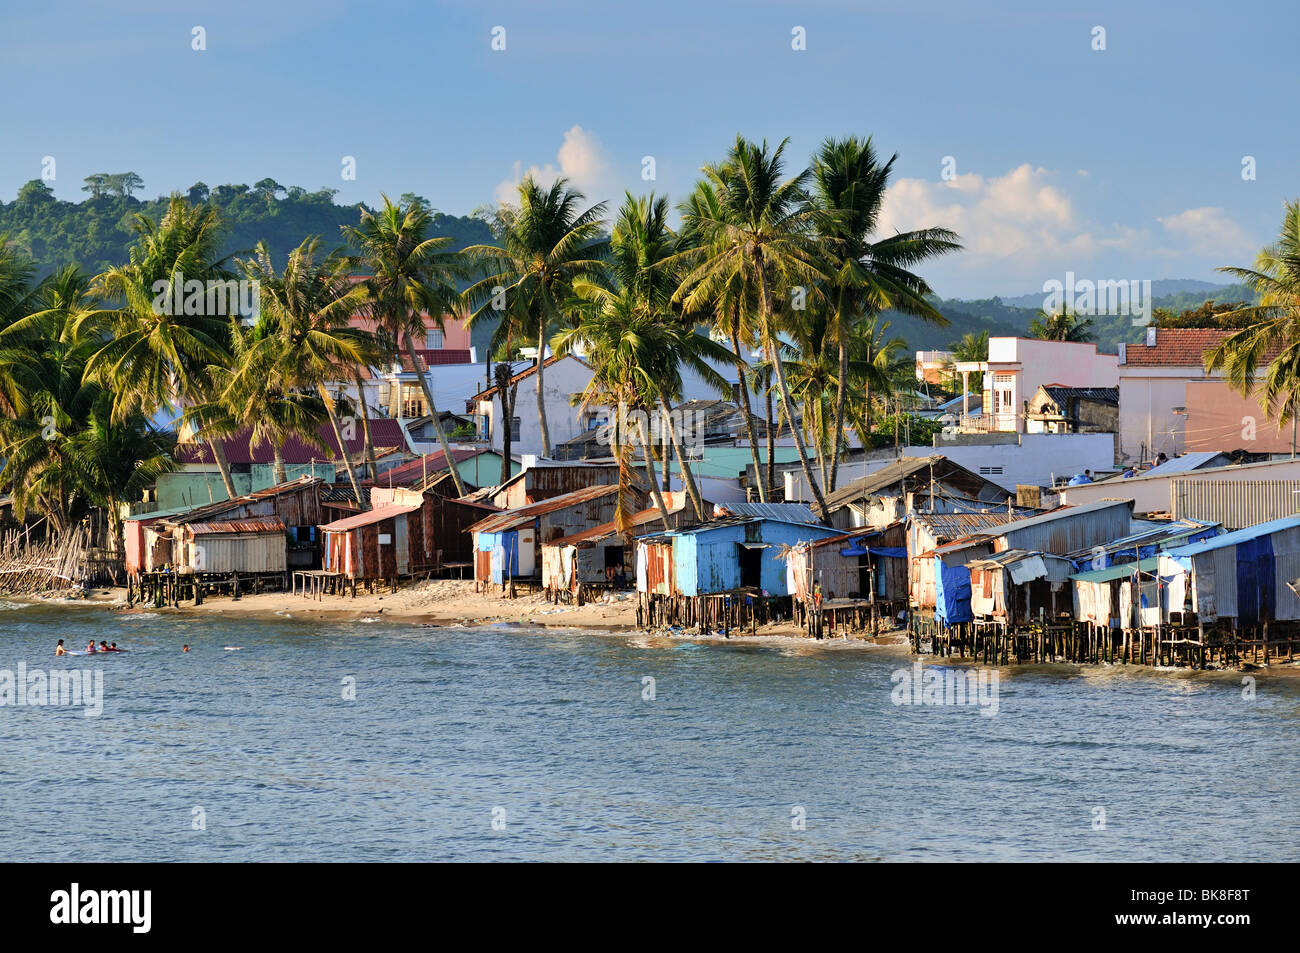 Idyllic fishing village with simple colorful wooden houses and palm trees, Phu Quoc, Vietnam, Asia Stock Photo